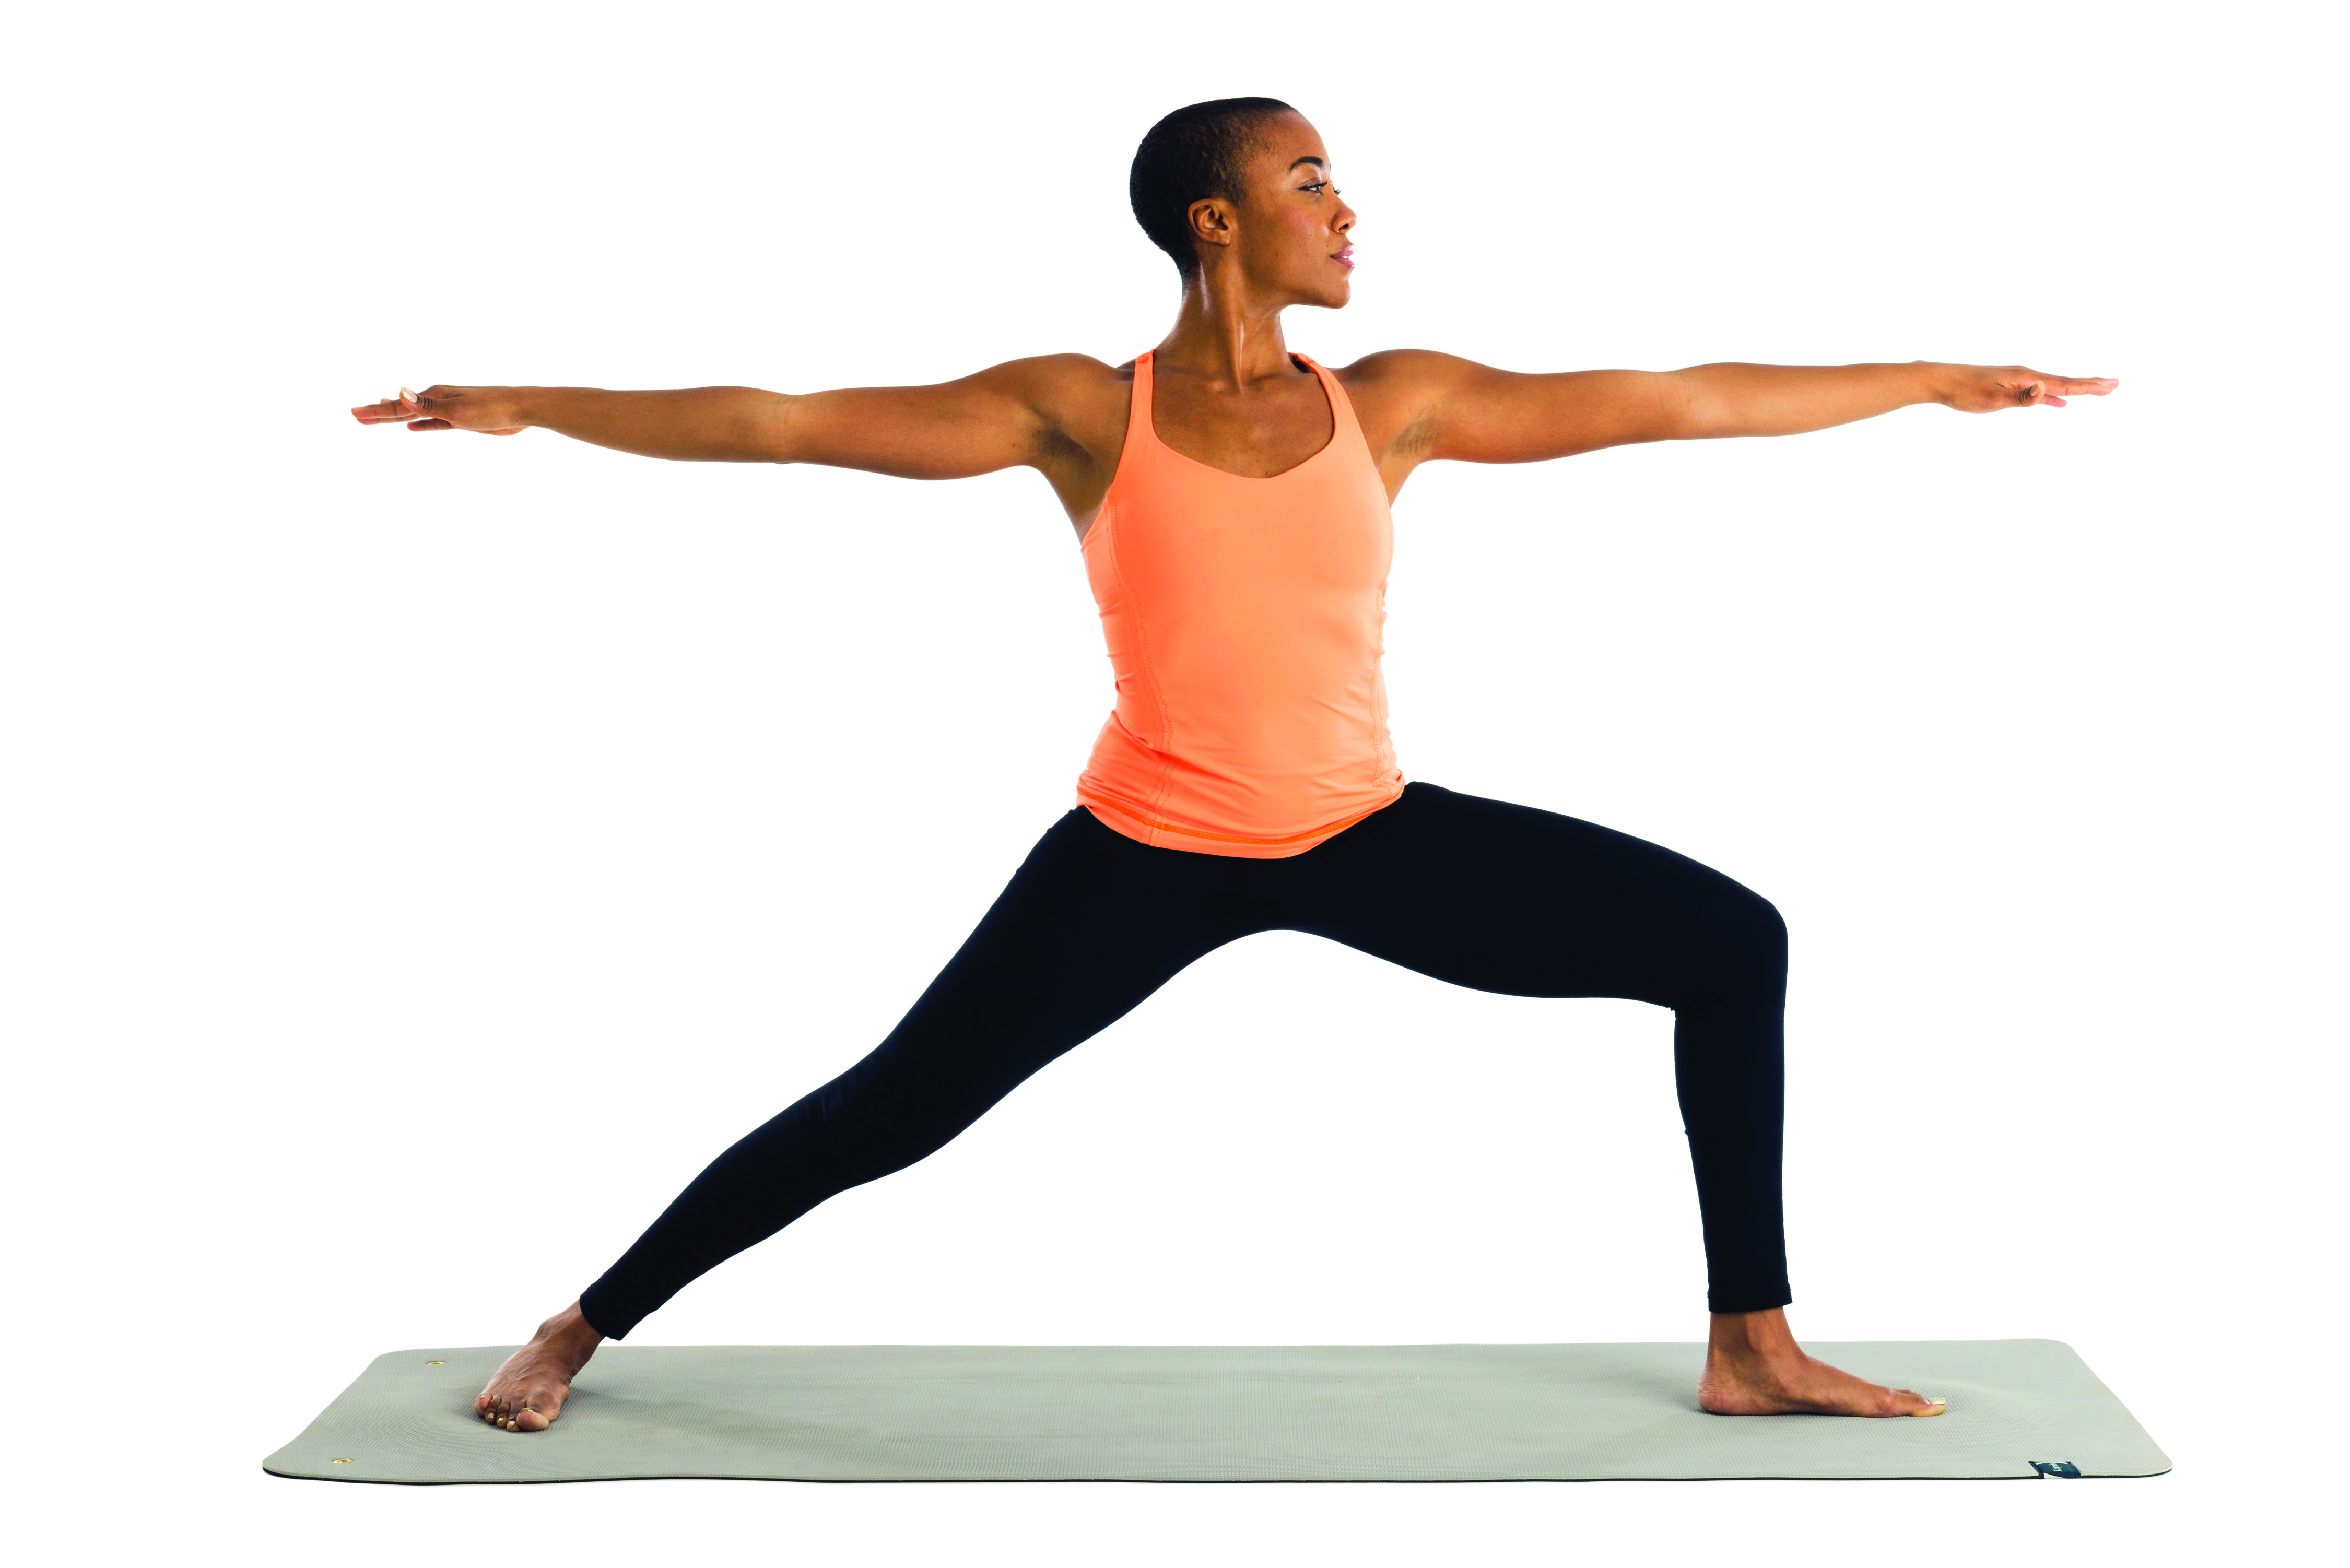 Find Your Flow With This Kripalu Yoga Sequence - Yoga Journal